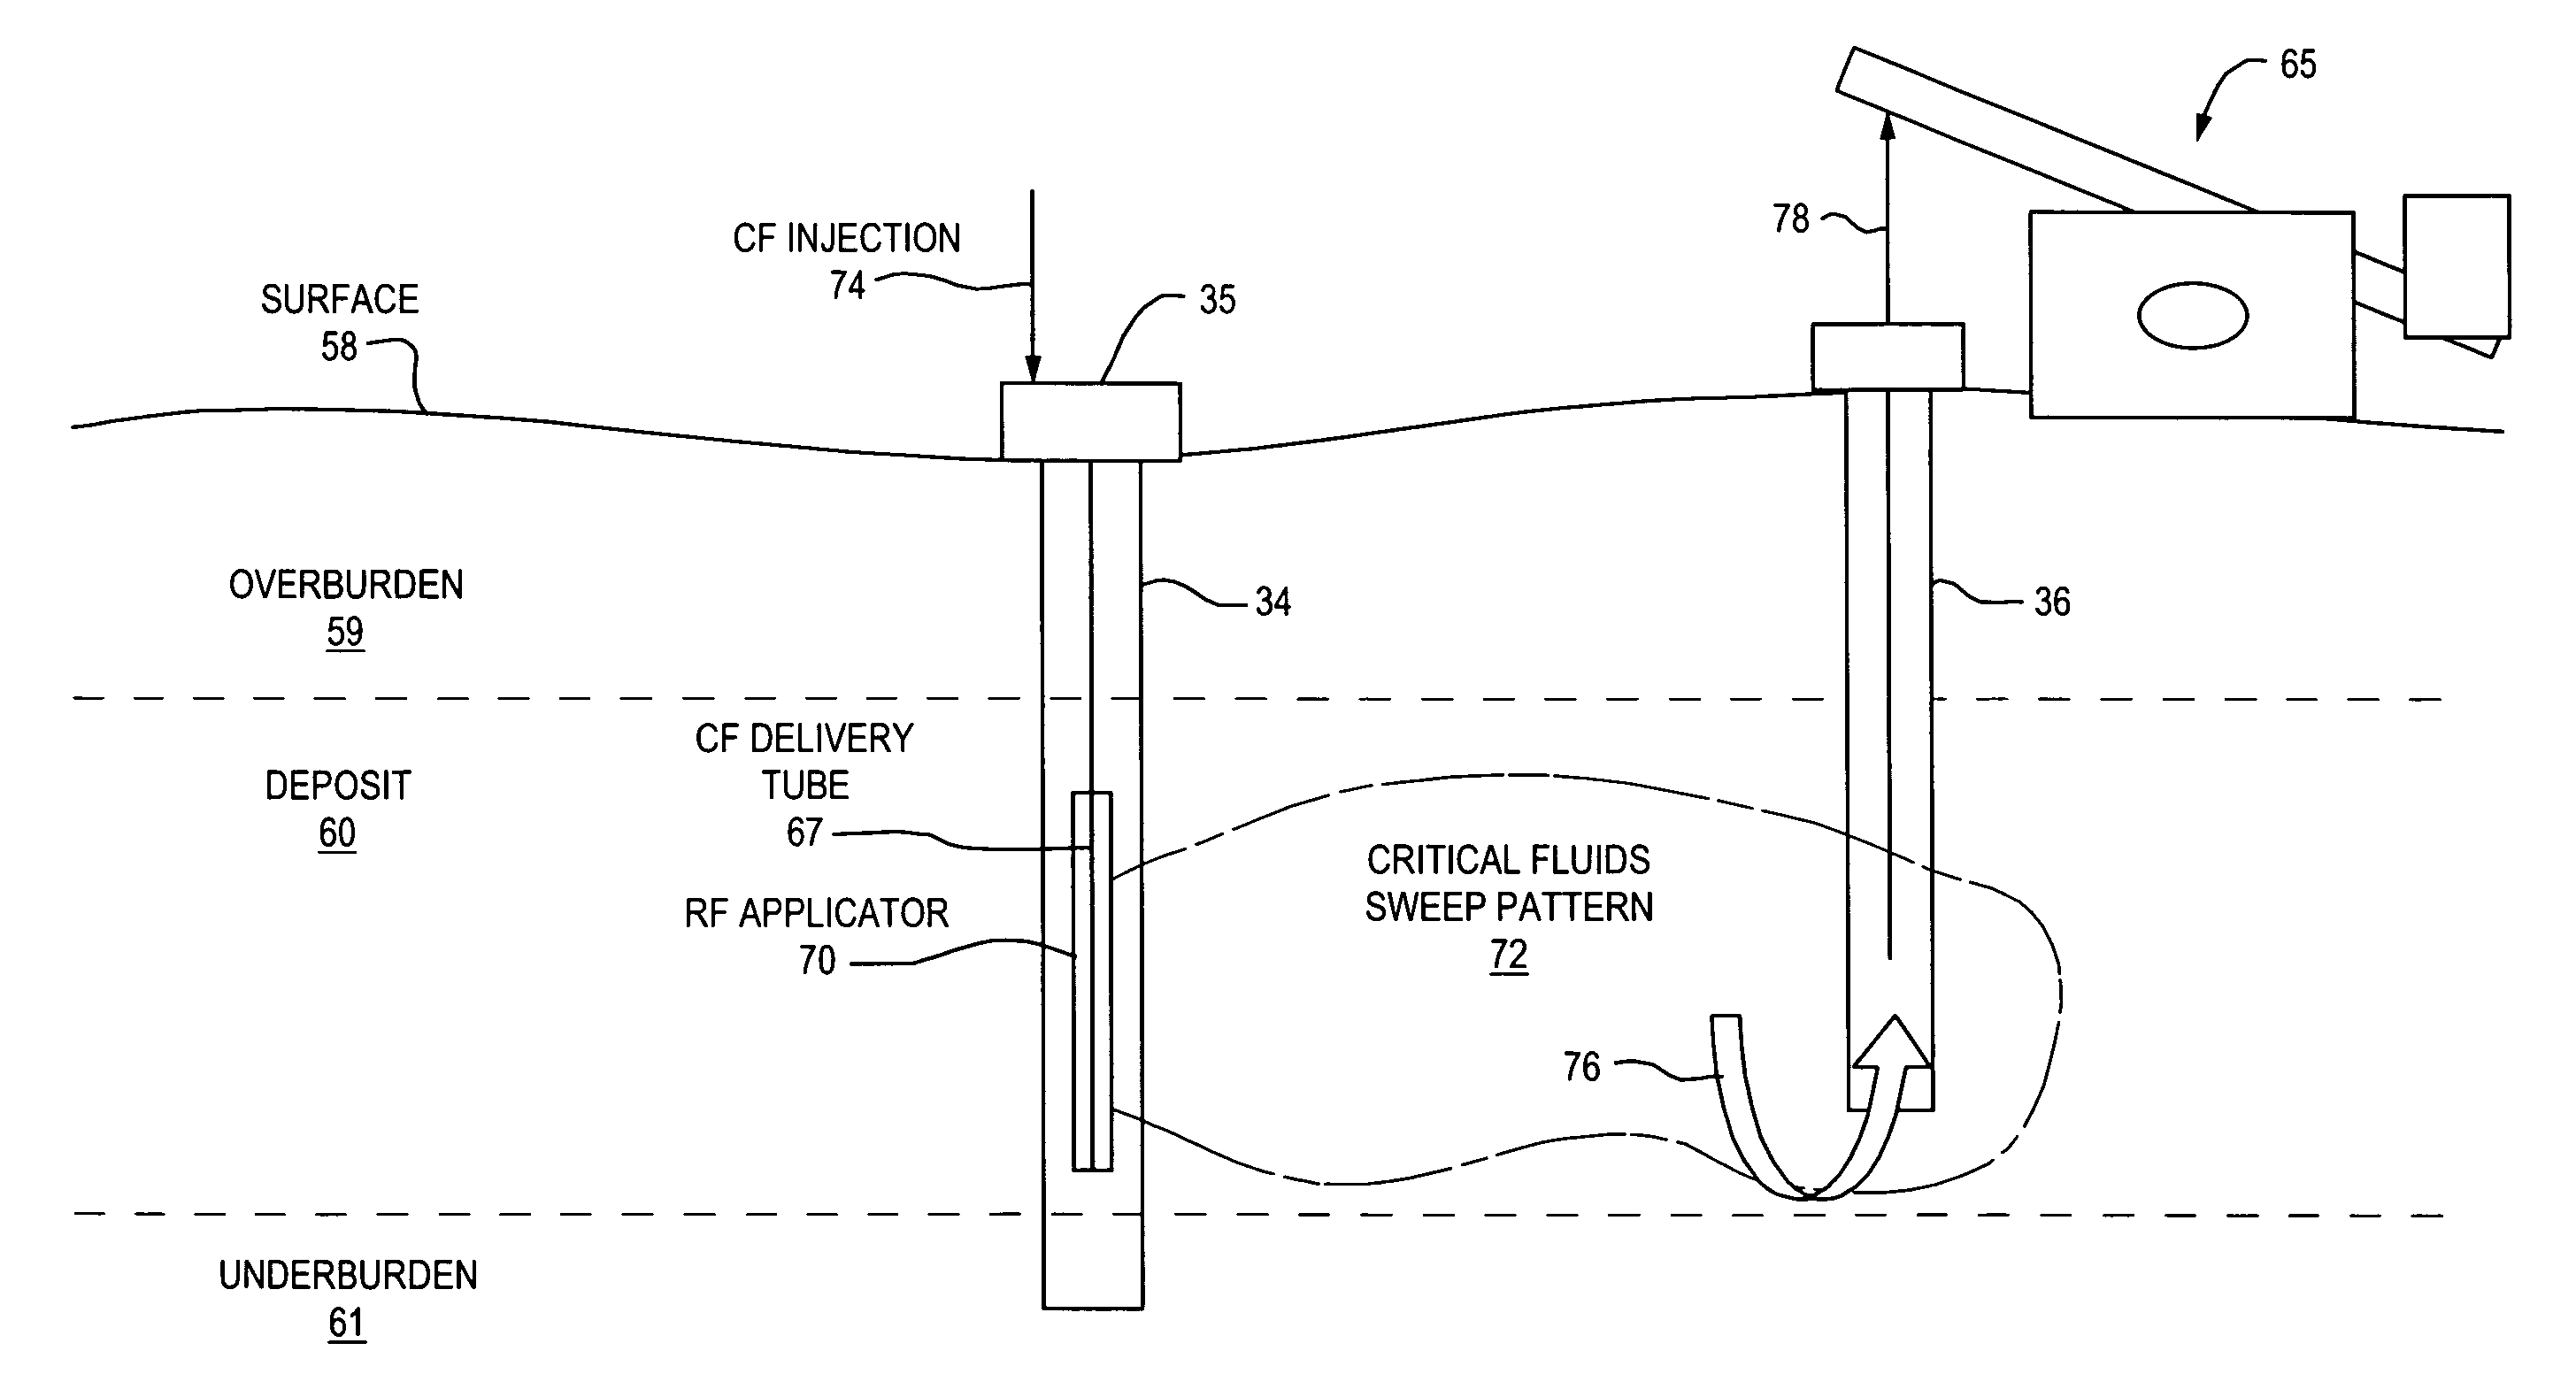 Method and apparatus for capture and sequester of carbon dioxide and extraction of energy from large land masses during and after extraction of hydrocarbon fuels or contaminants using energy and critical fluids